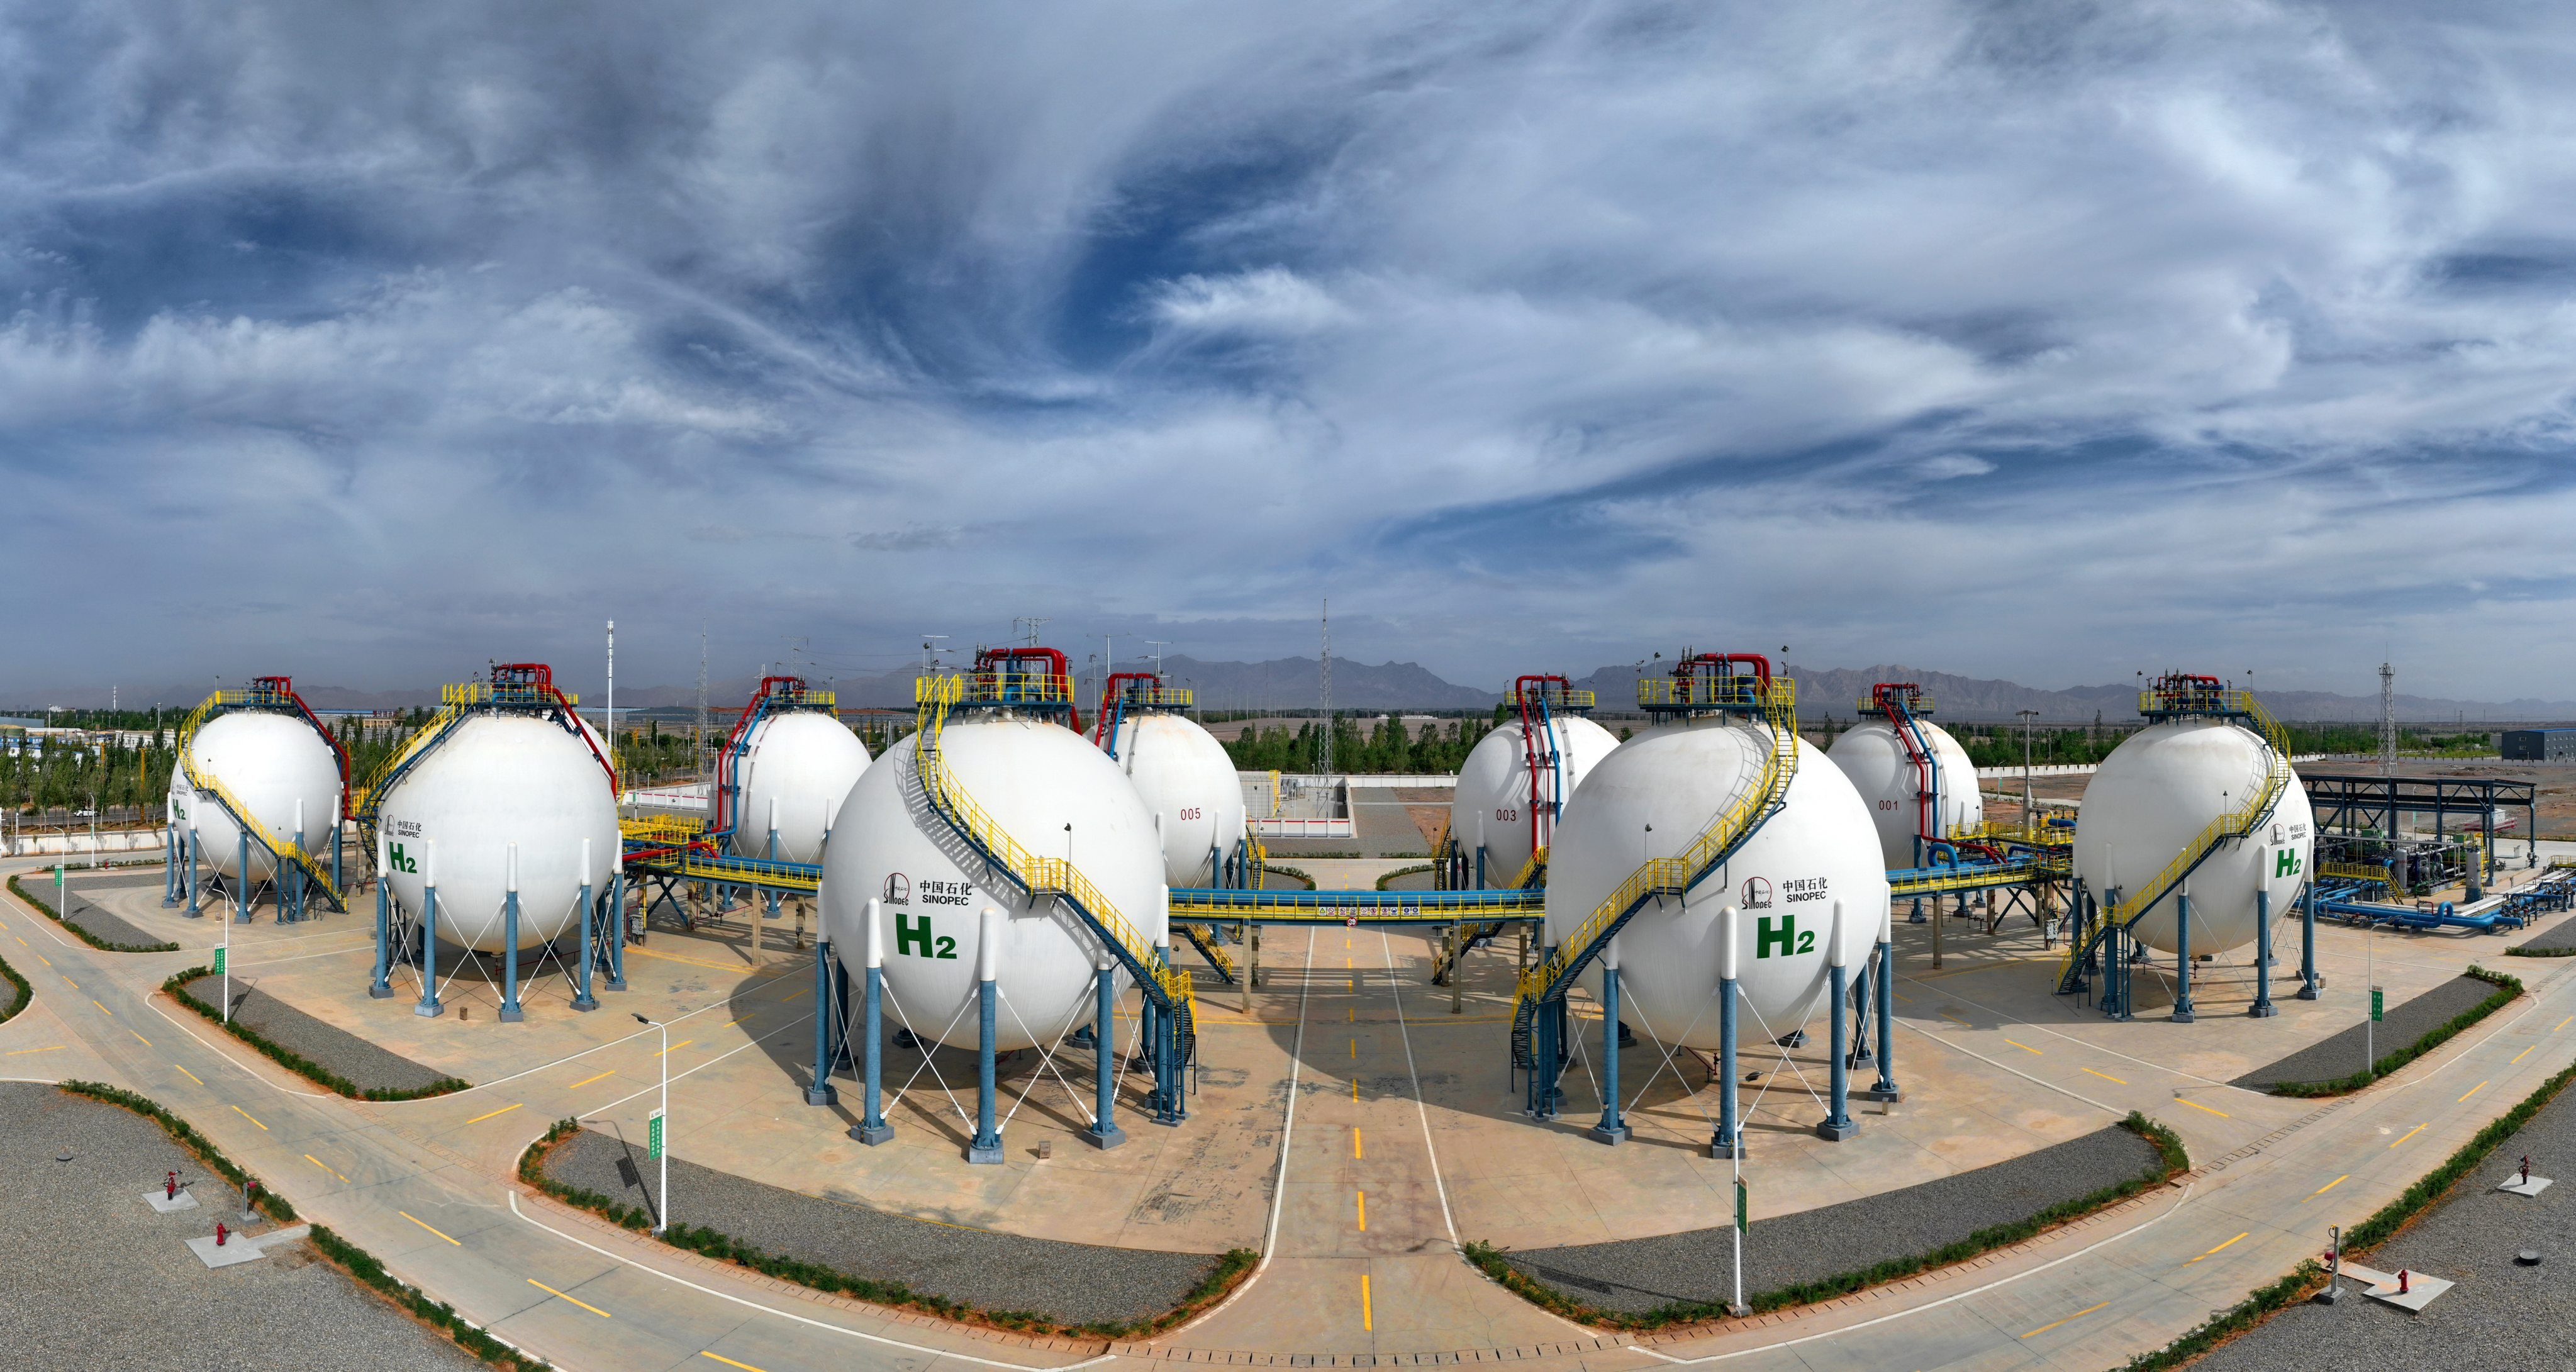 Storage tanks at a hydrogen plant in China’s Xinjiang region. An expert says the mainland is way ahead of Hong Kong in developing hydrogen technology. Photo: VCG/VCG via Getty Images